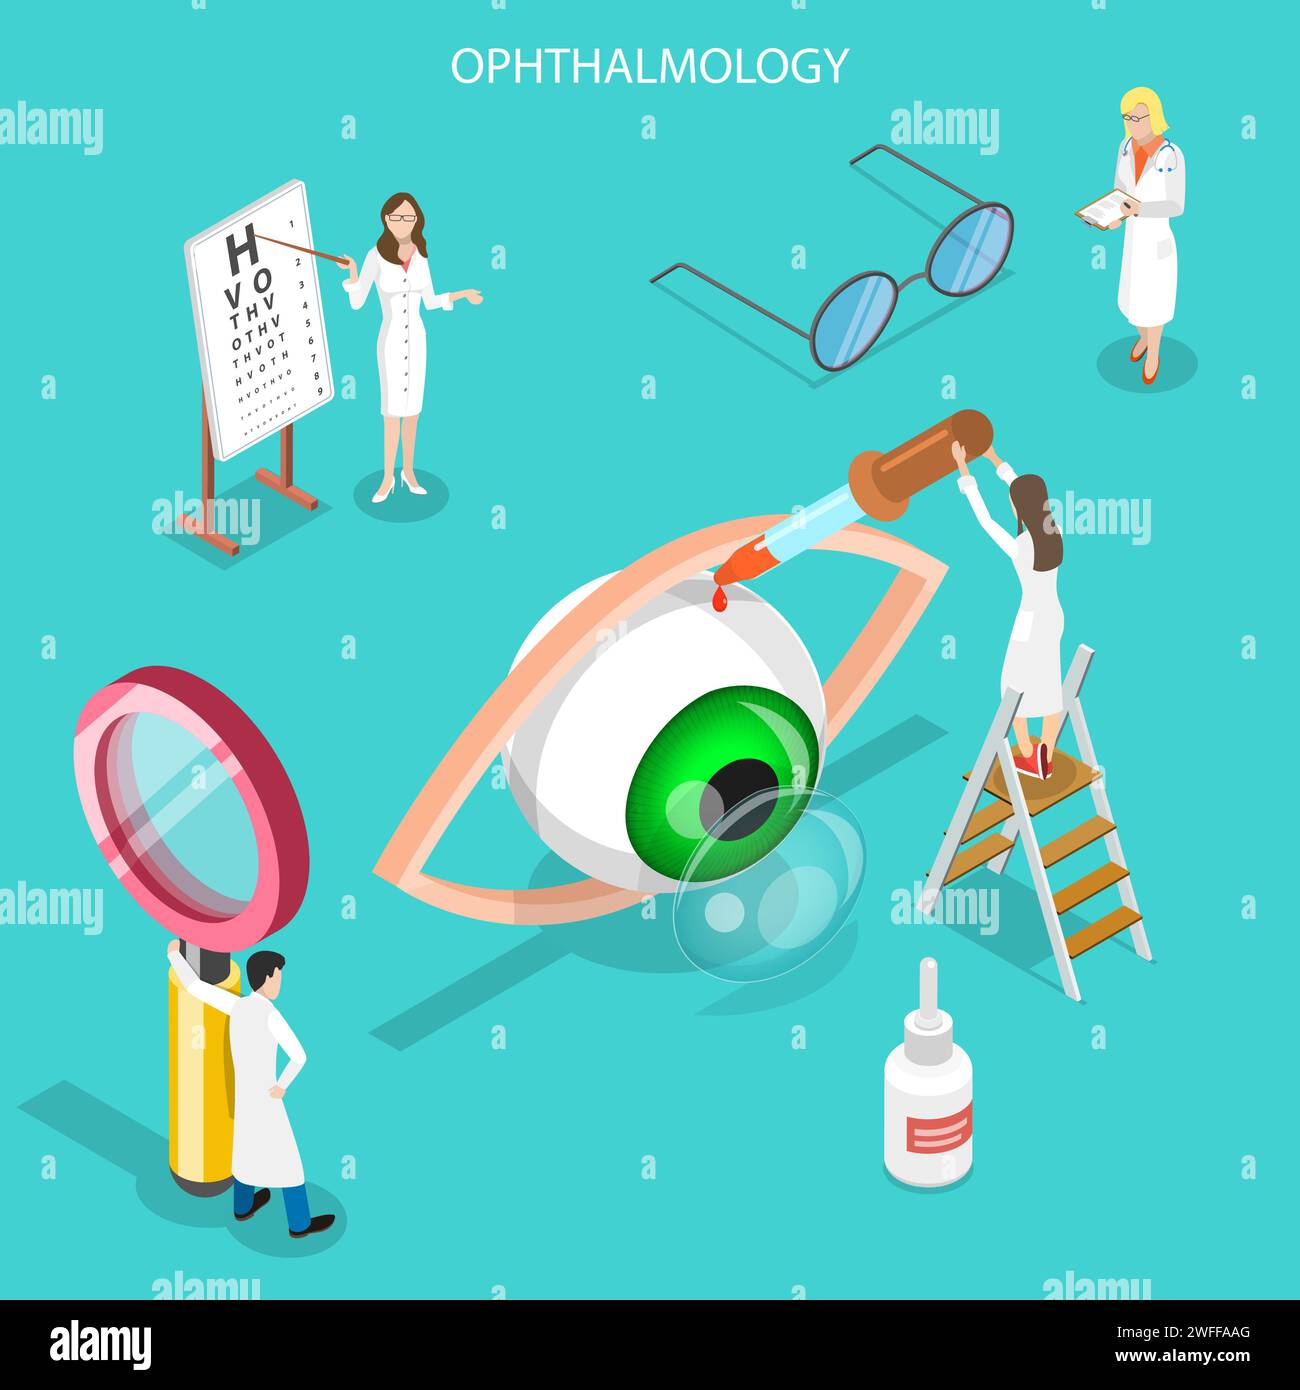 Isometric flat vector concept of ophthalmology, eyesight check up, eyes health care, ophthalmological examination. Stock Vector